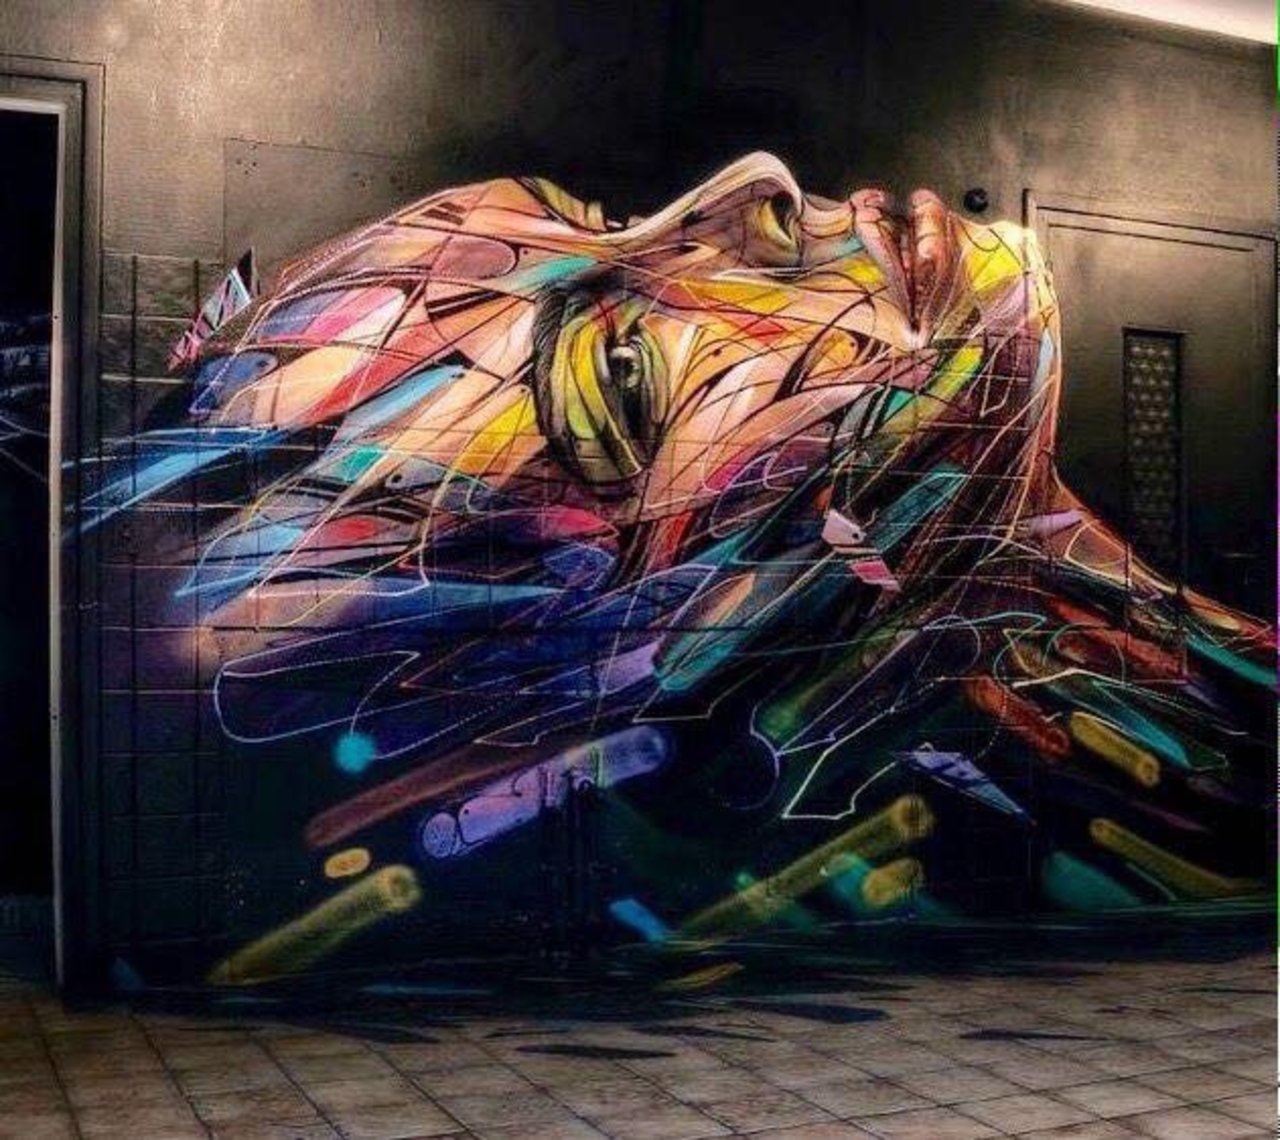 Galaxy Beauty Face – Colorful #StreetArt – Be ▲rtist – Be ▲rt Magazine https://beartistbeart.com/2016/09/13/galaxy-beauty-face-colorful-streetart/?utm_campaign=crowdfire&utm_content=crowdfire&utm_medium=social&utm_source=twitter https://t.co/DYwy71I6w6